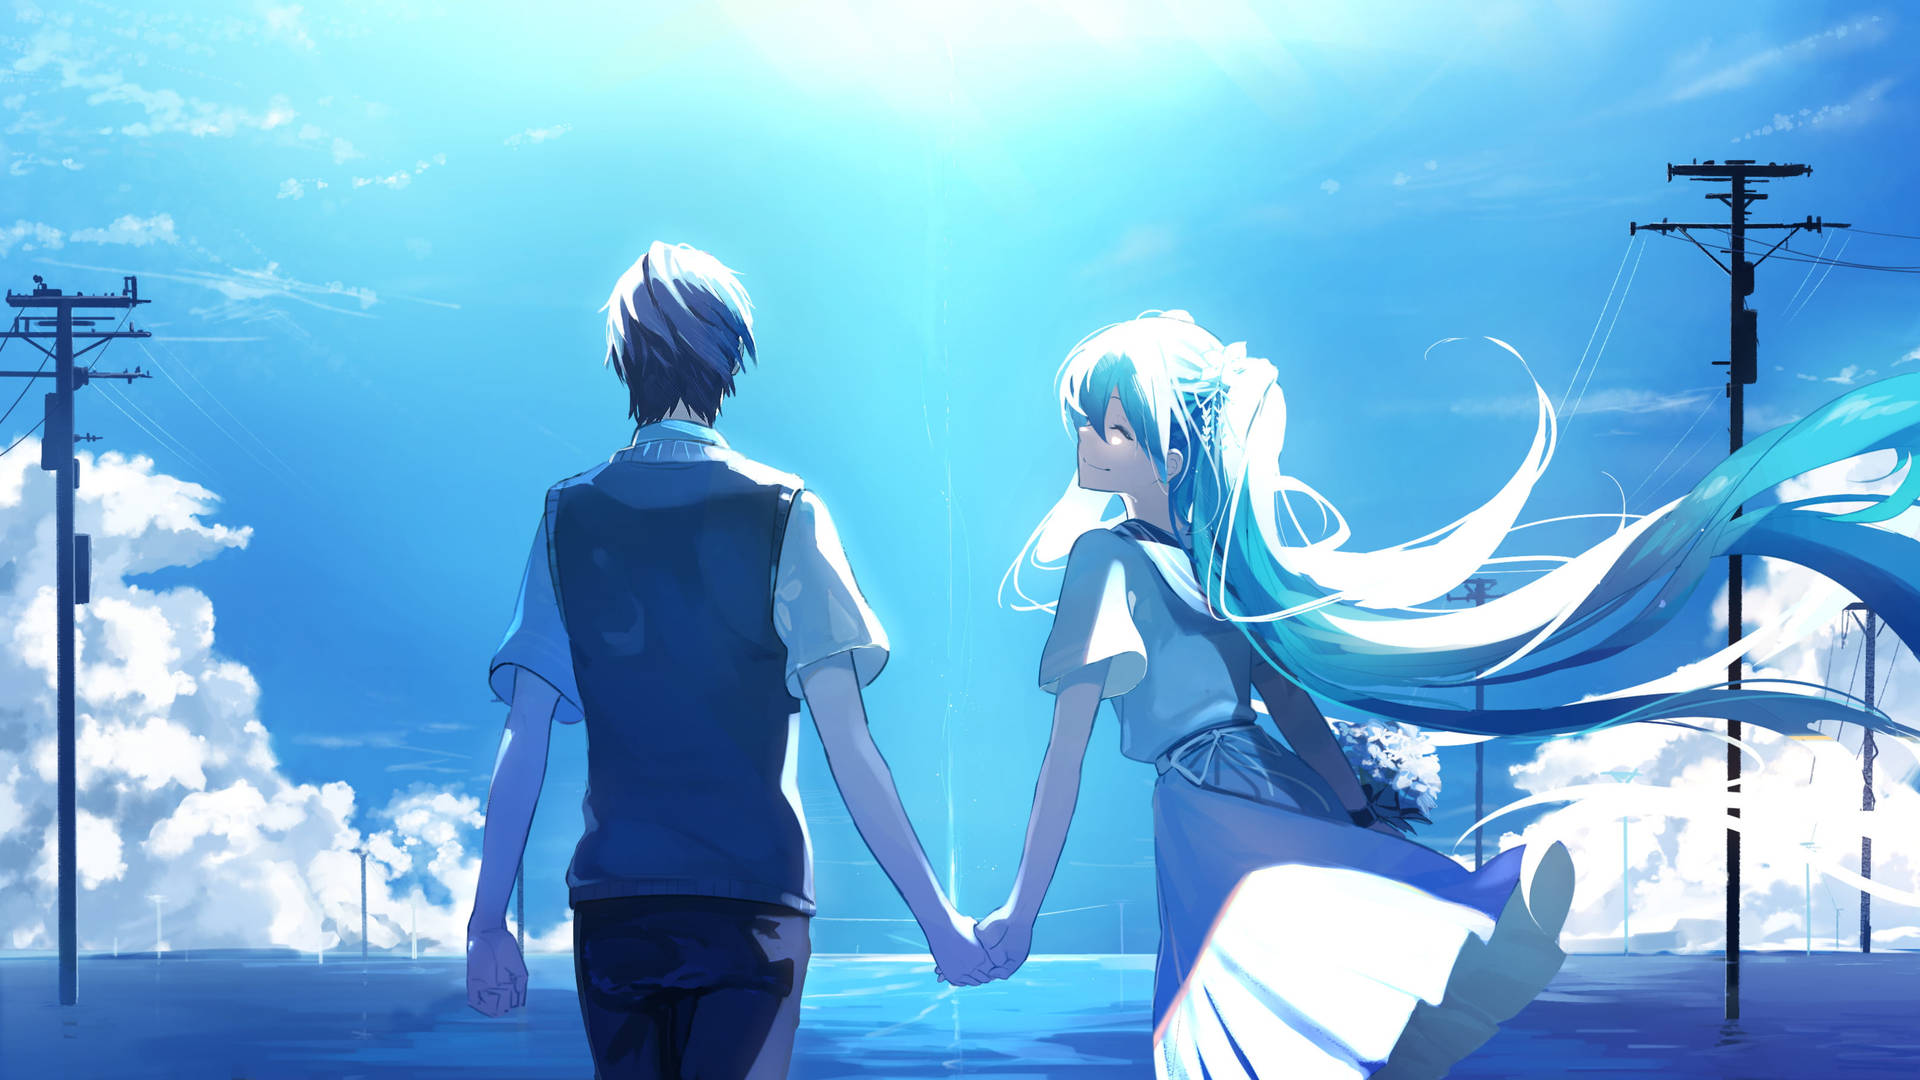 Cute Anime Couple In Tinted Blue